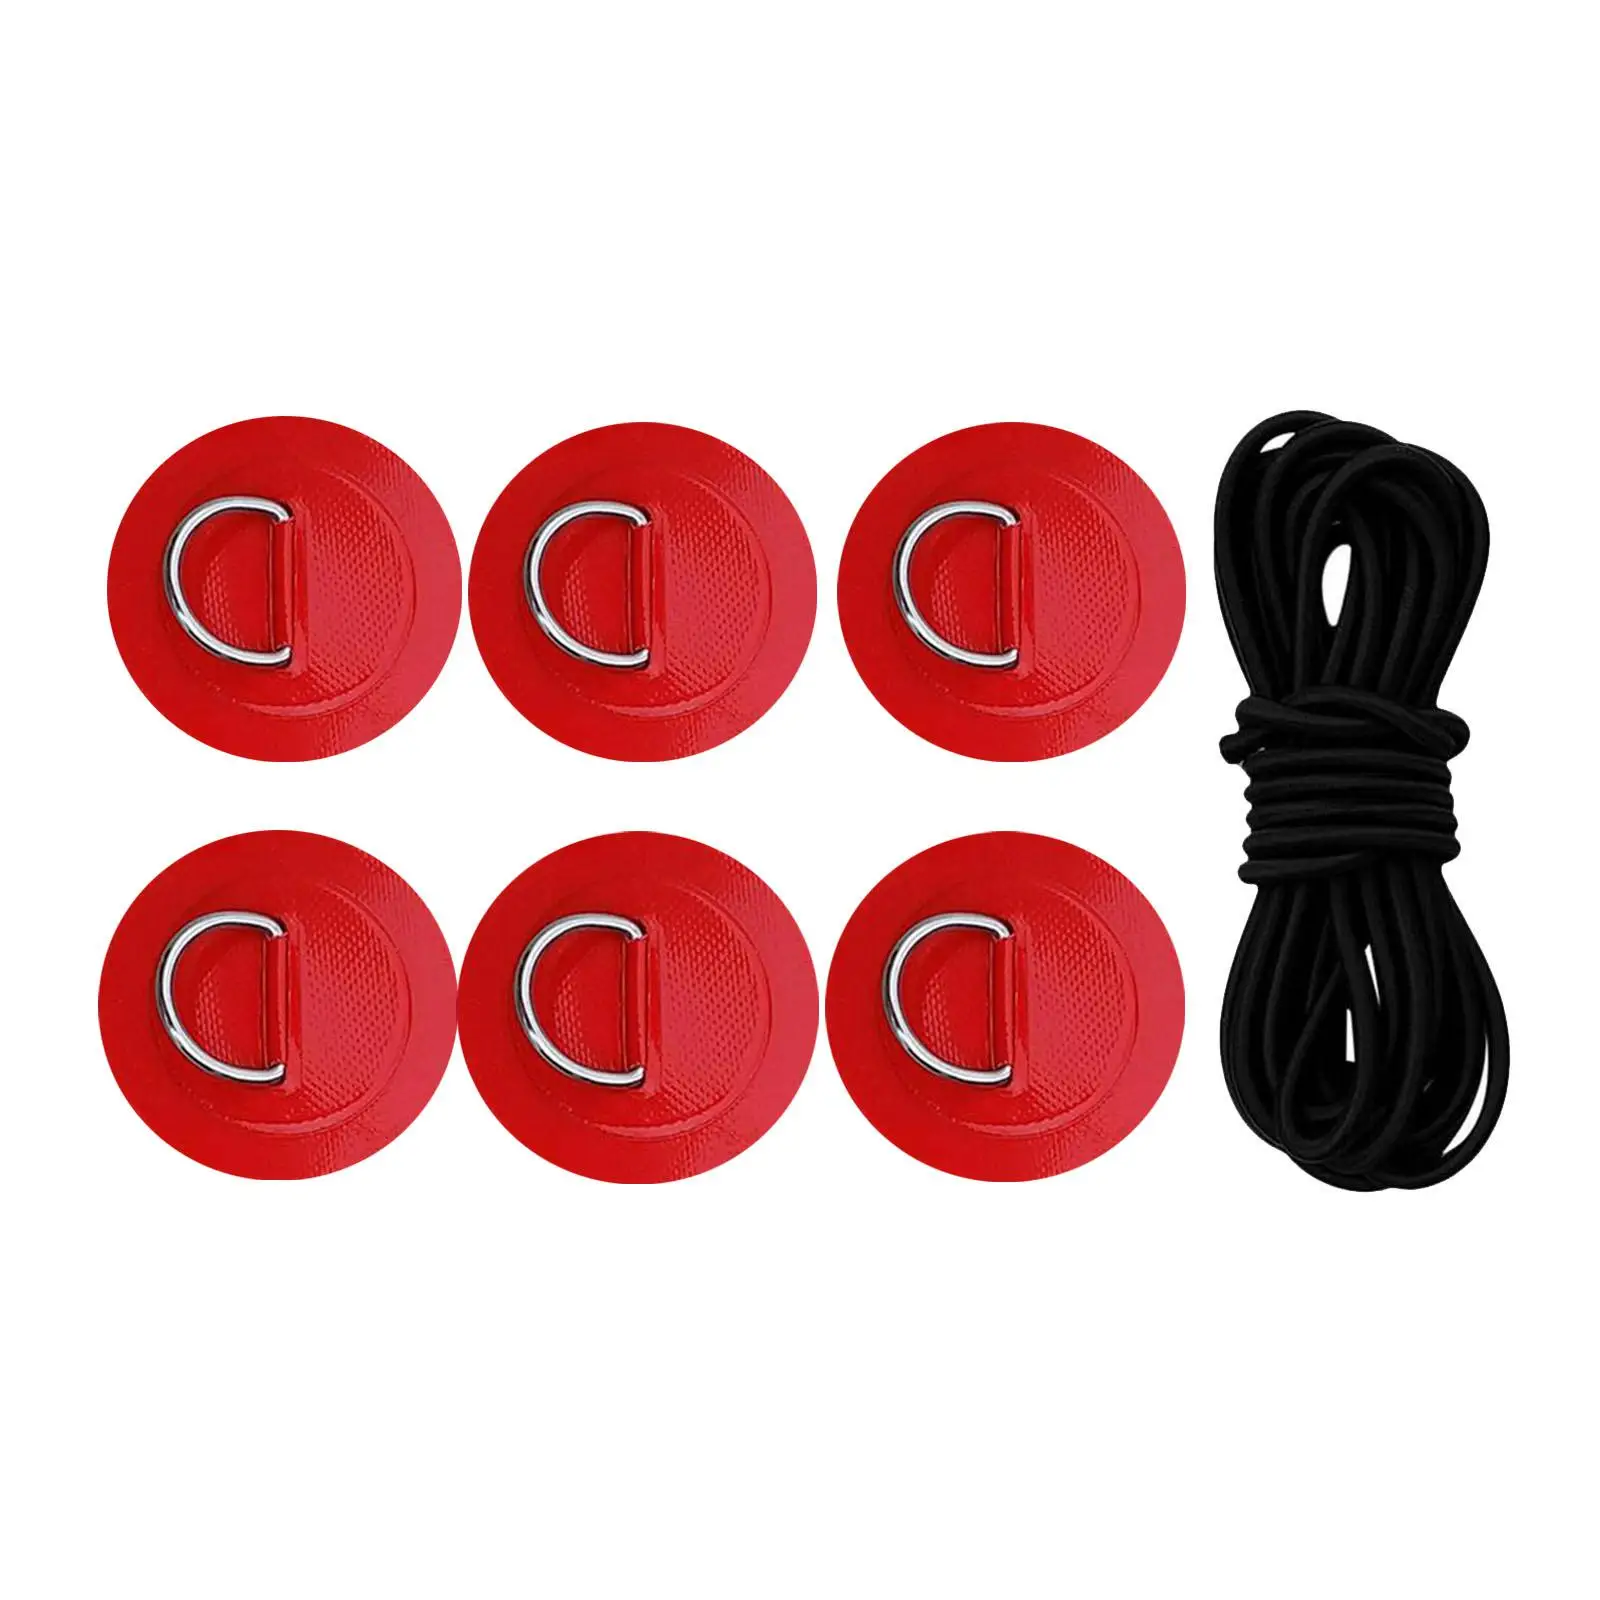 6 Pieces D Ring Patch Deck Rigging Kit for Inflatable Boat Paddleboard Raft